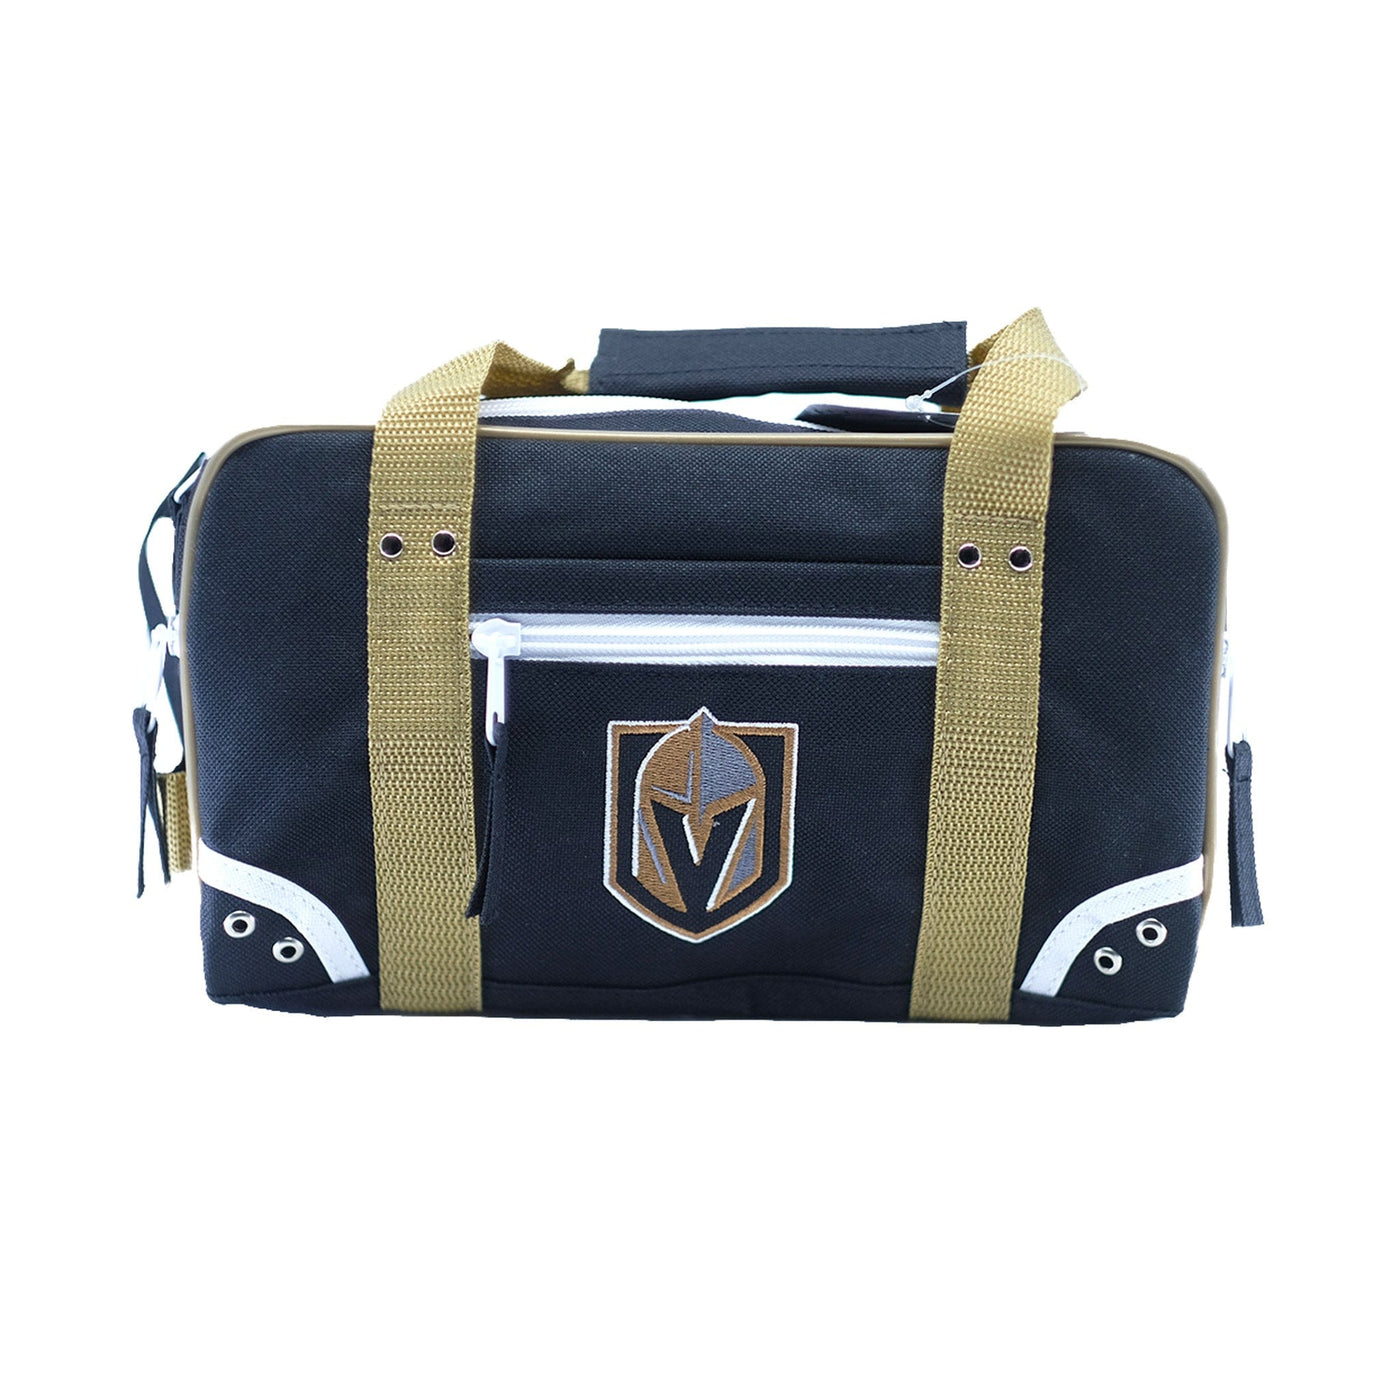 Vegas Golden Knights Ultimate Sports Kit NHL Toiletry Bag - The Hockey Shop Source For Sports